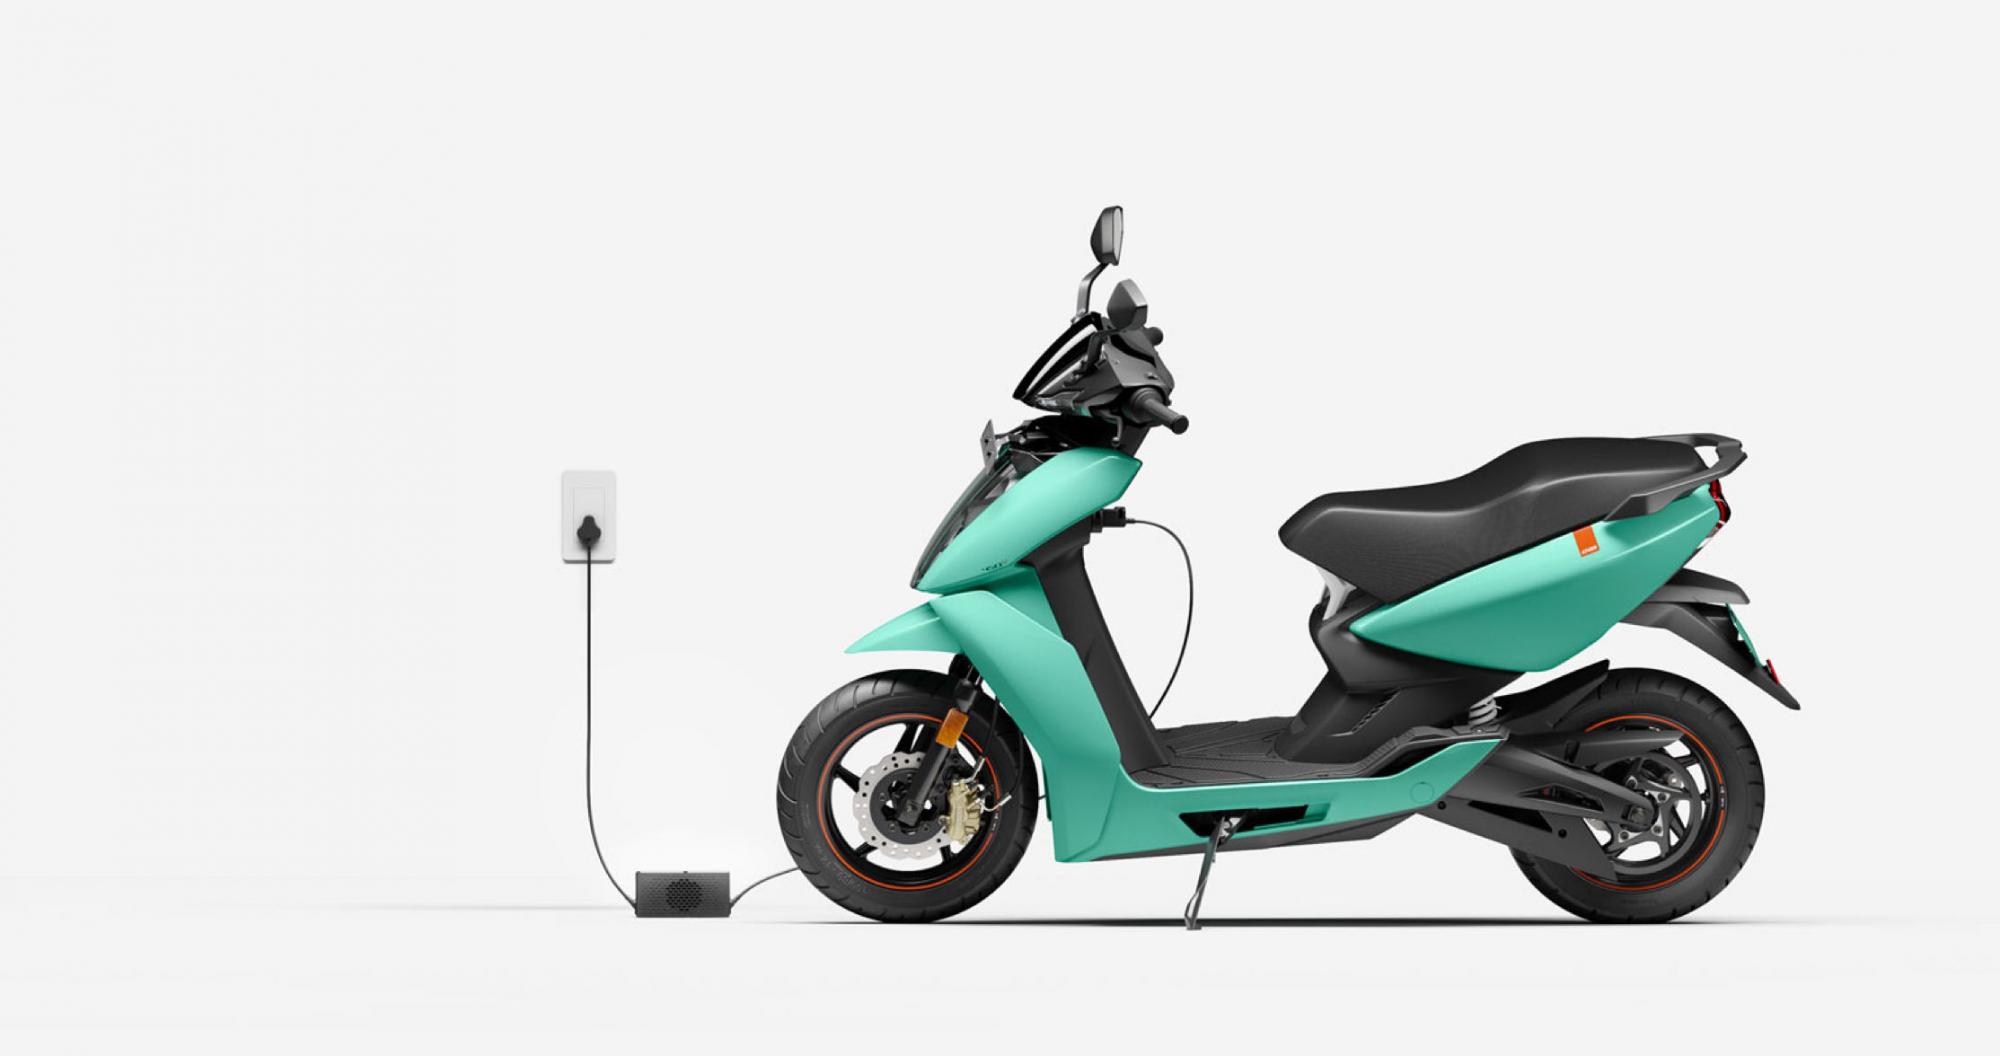 ather-energy-to-enter-4-more-cities-with-ather-450x